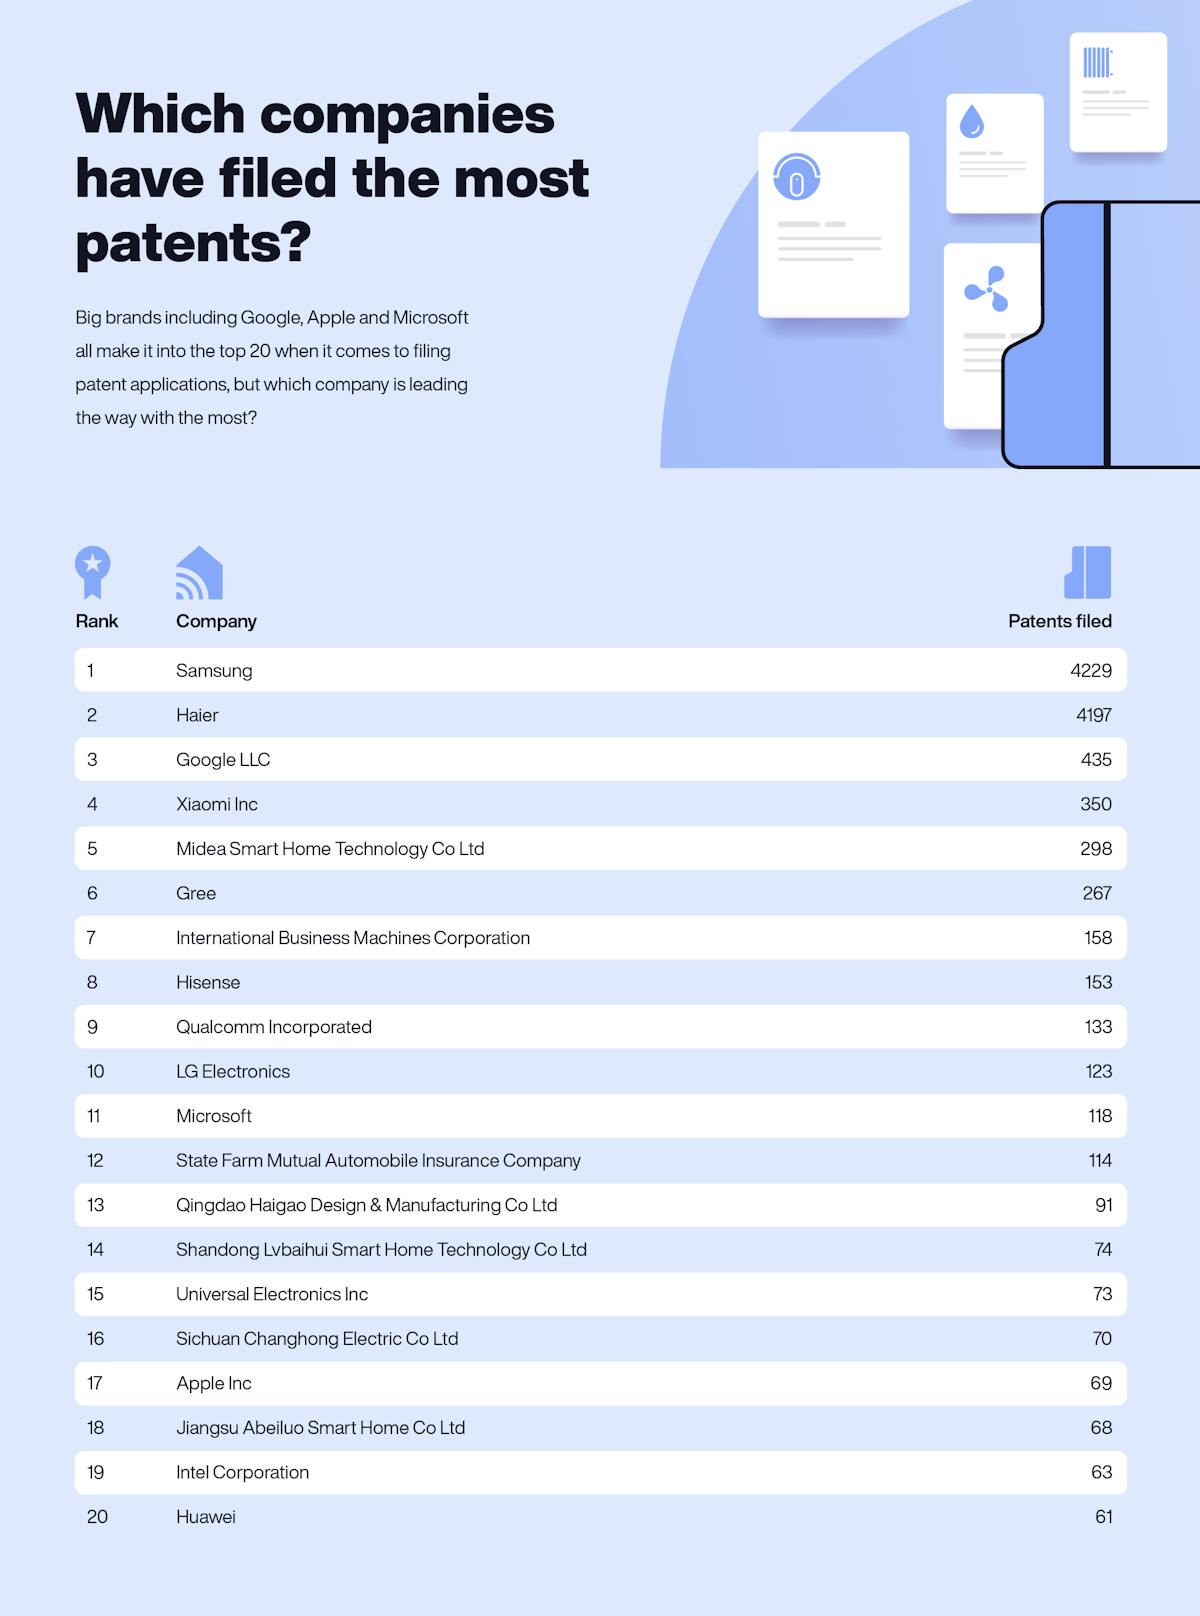 Table showing which companies have the most patents filed.